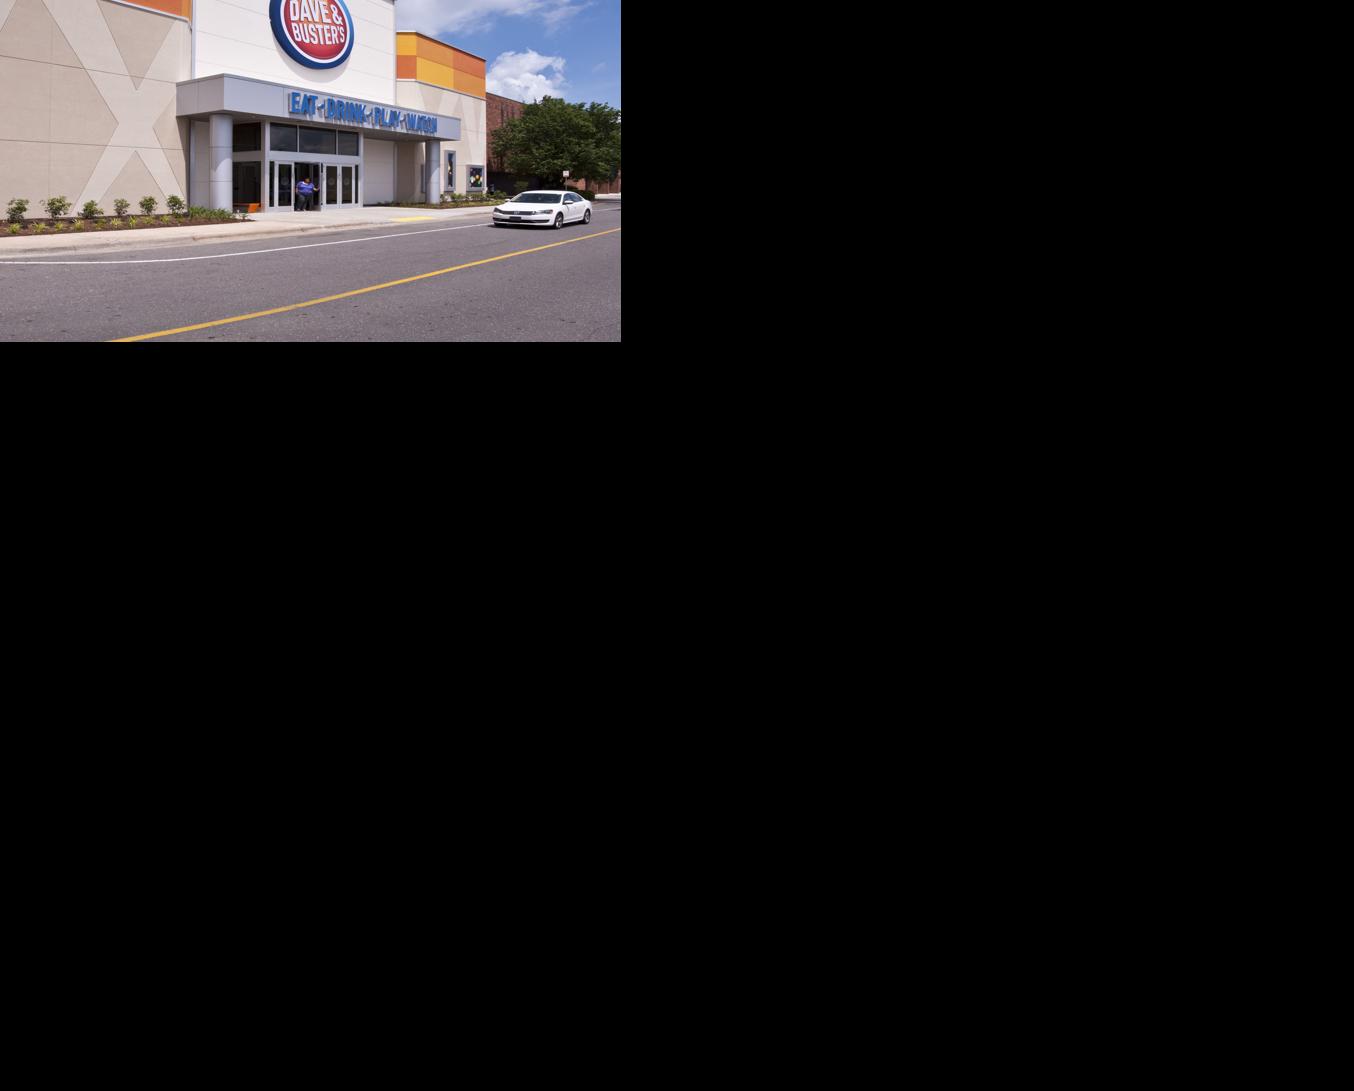 Dave & Buster's coming to Killeen